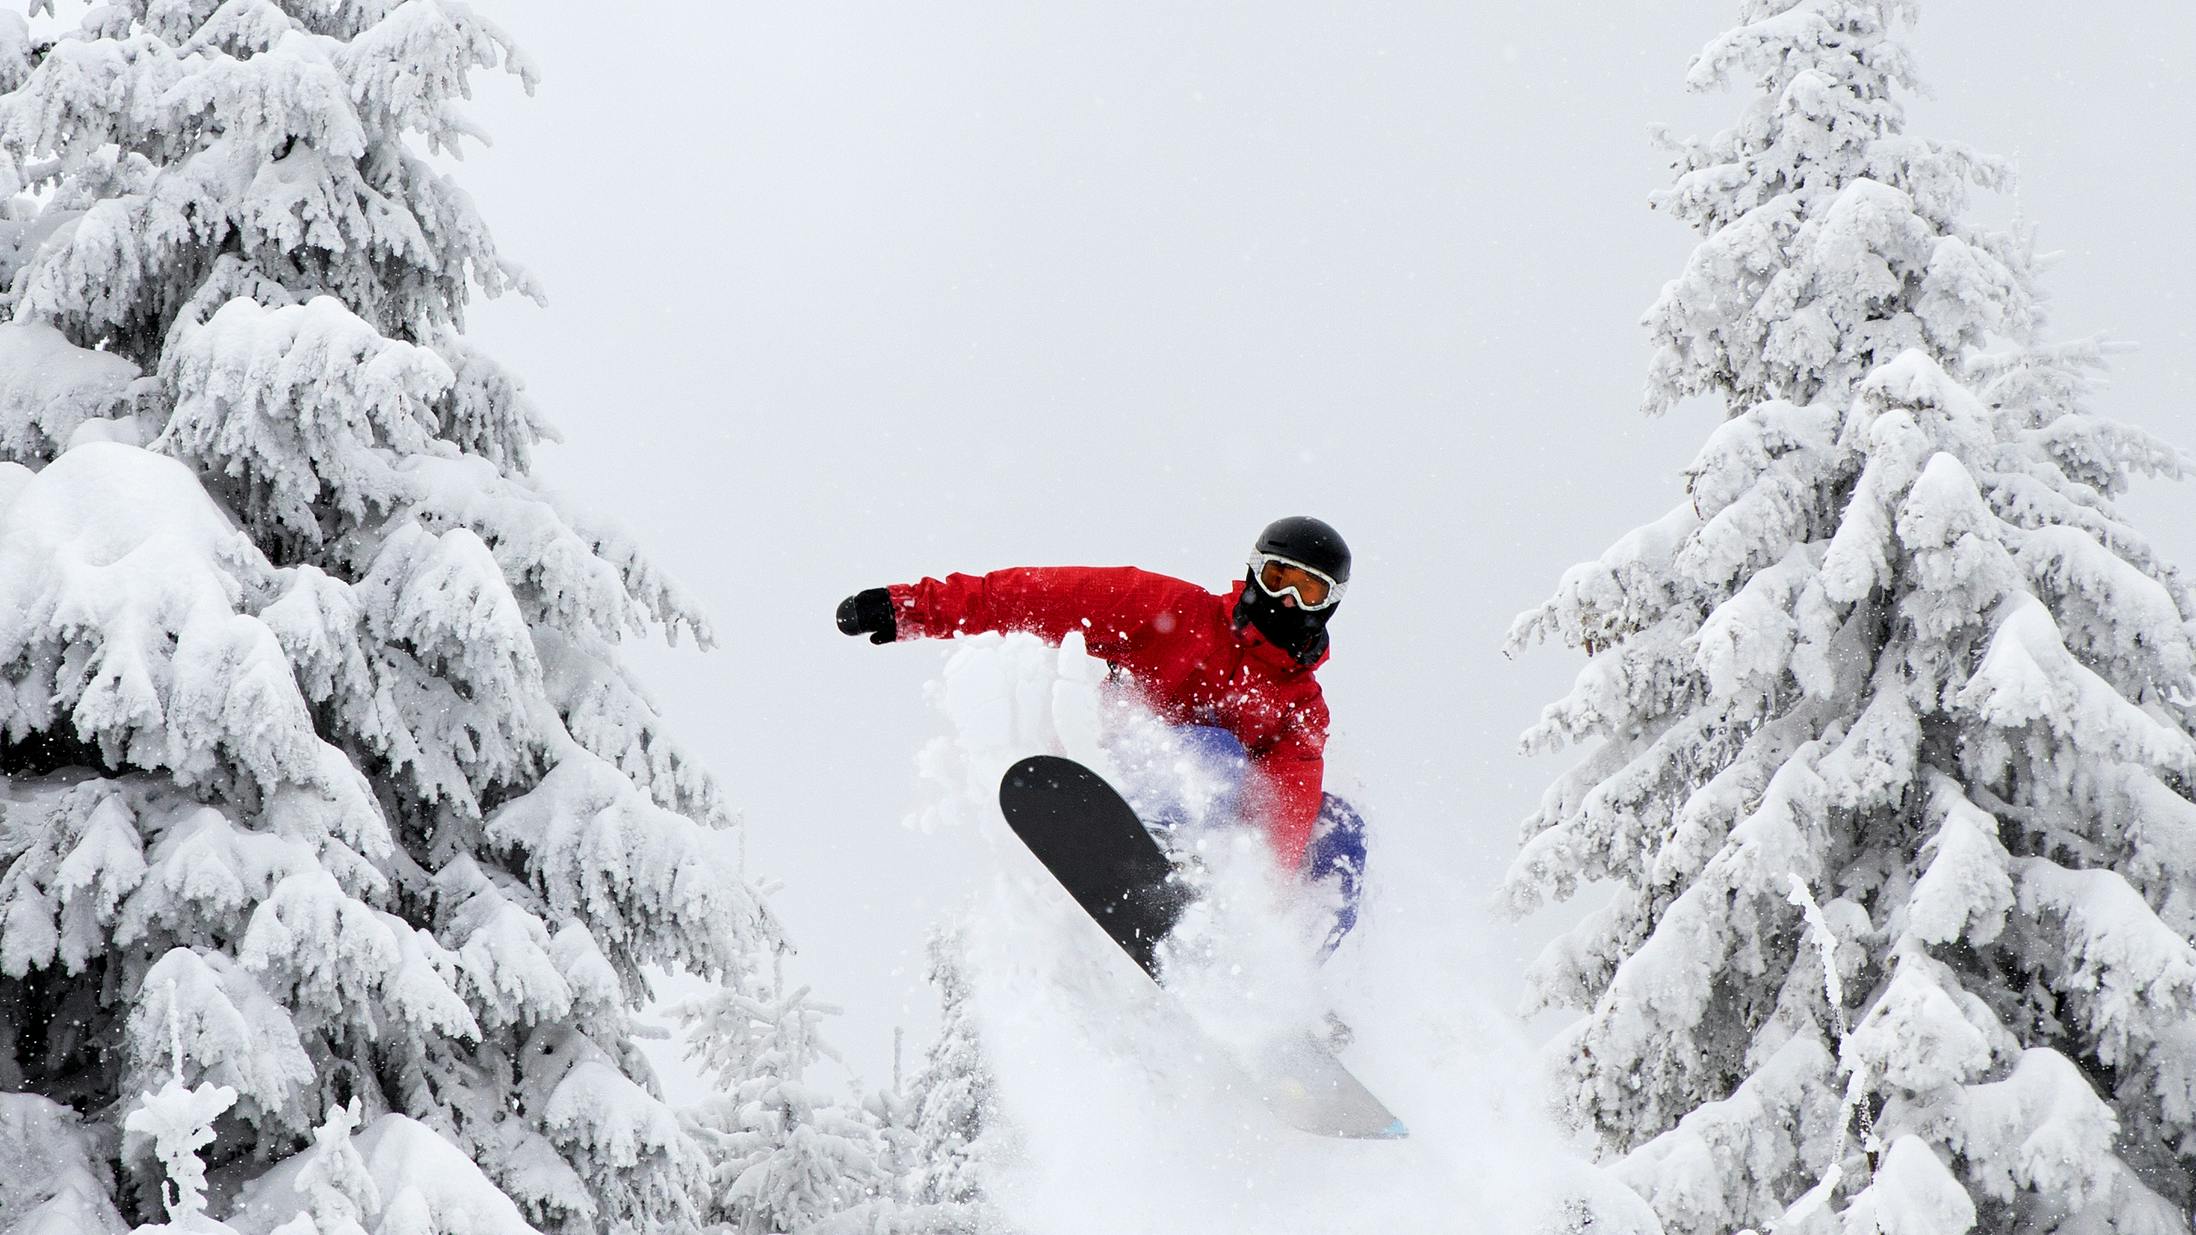 A snowboarder in a red jacket jumps between snowy trees